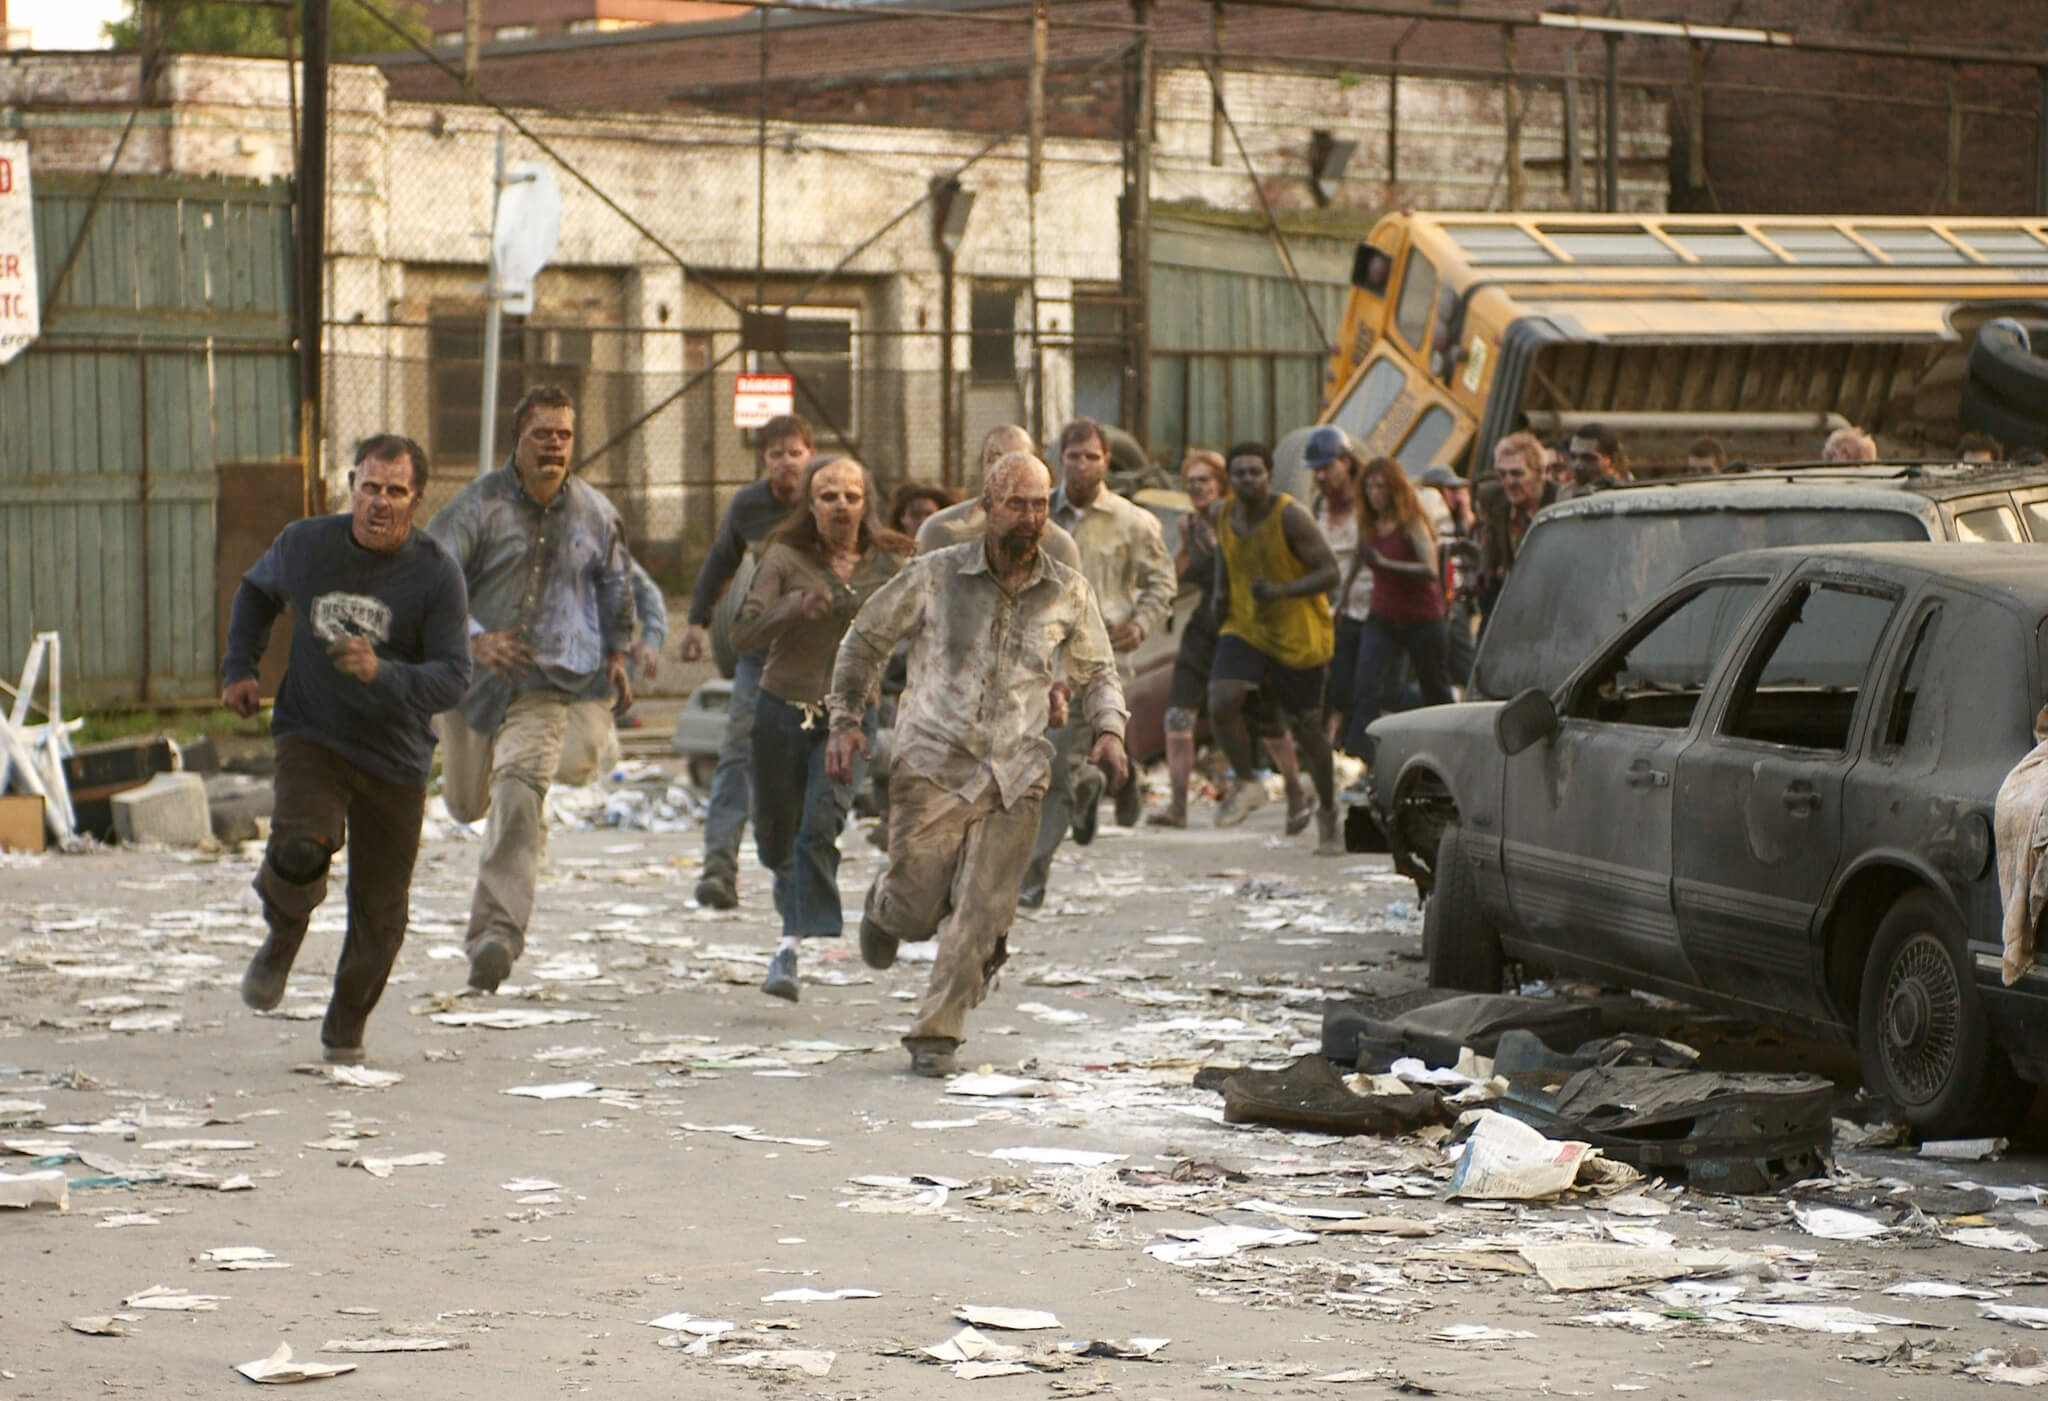 A still from Zack Snyder's Dawn of the Dead